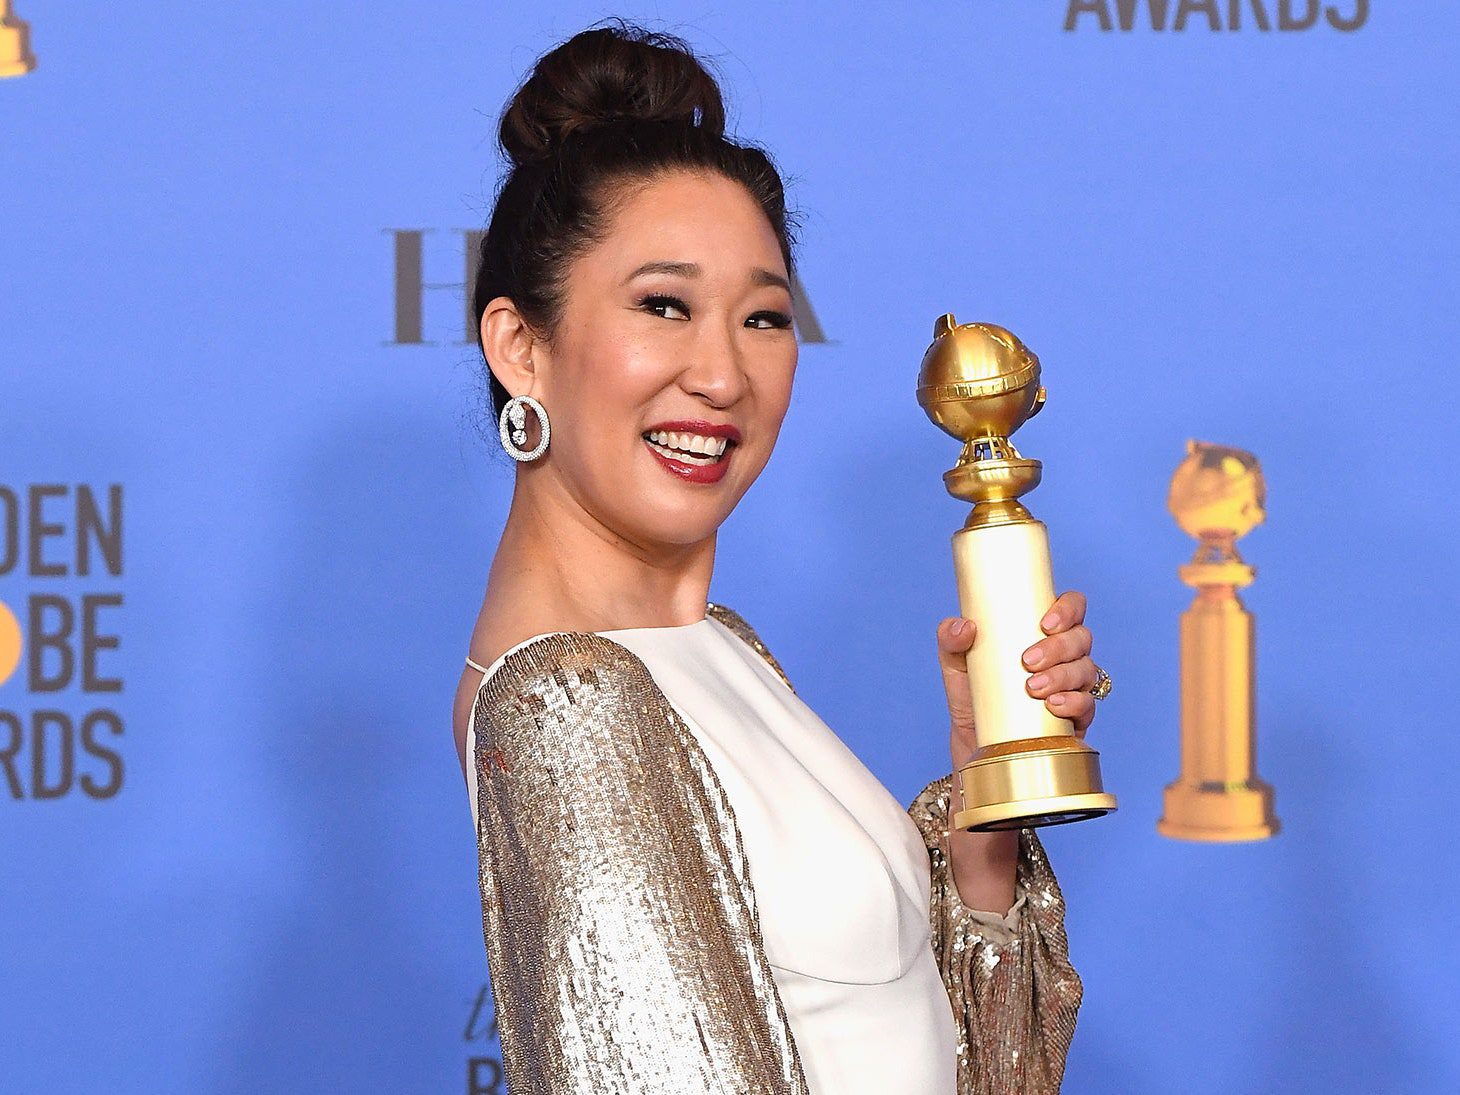 Who Is Sandra Oh Dating?